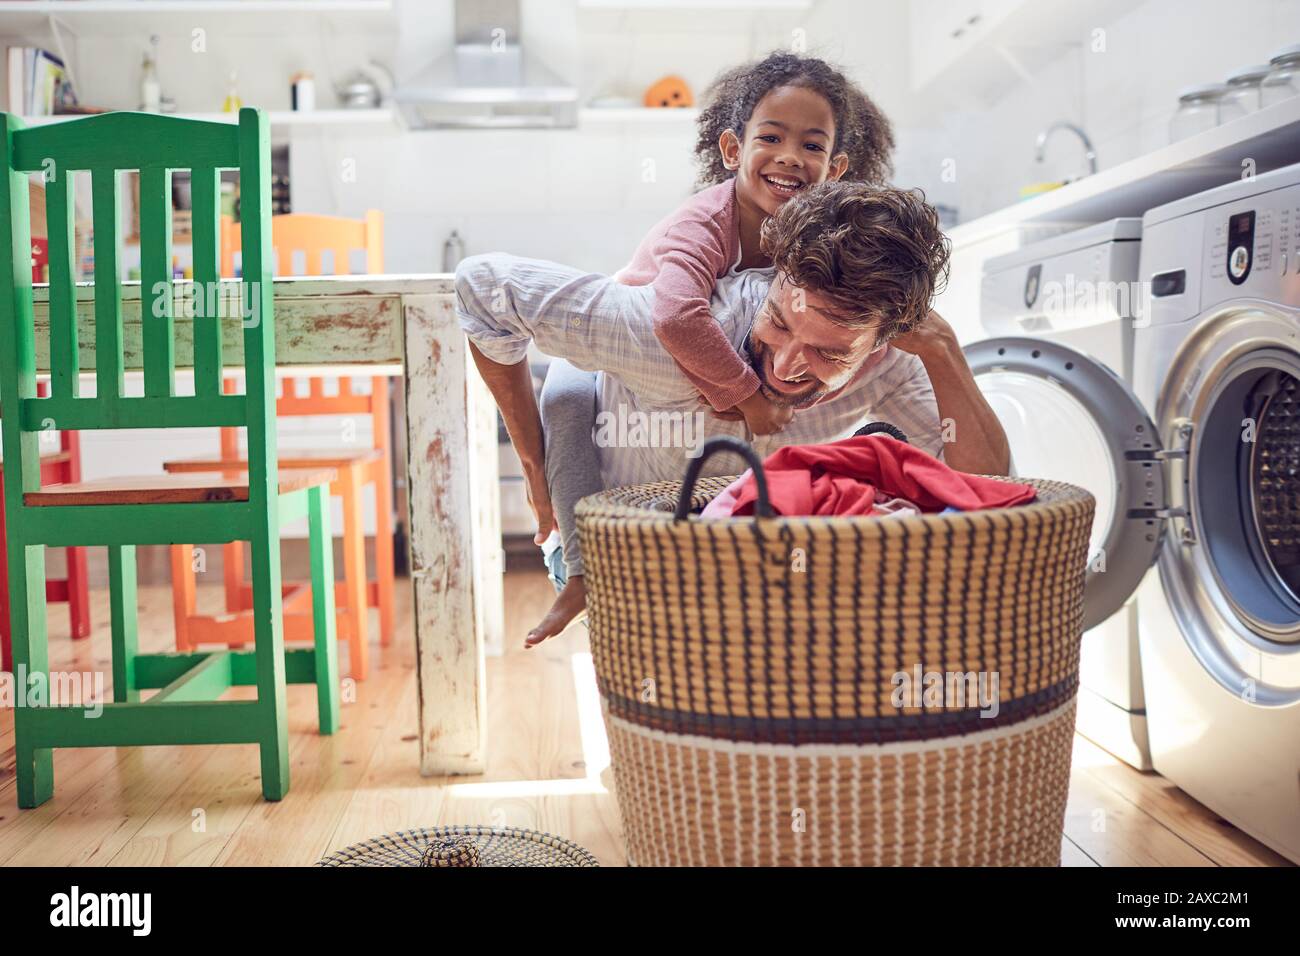 Playful father and daughter doing laundry Stock Photo